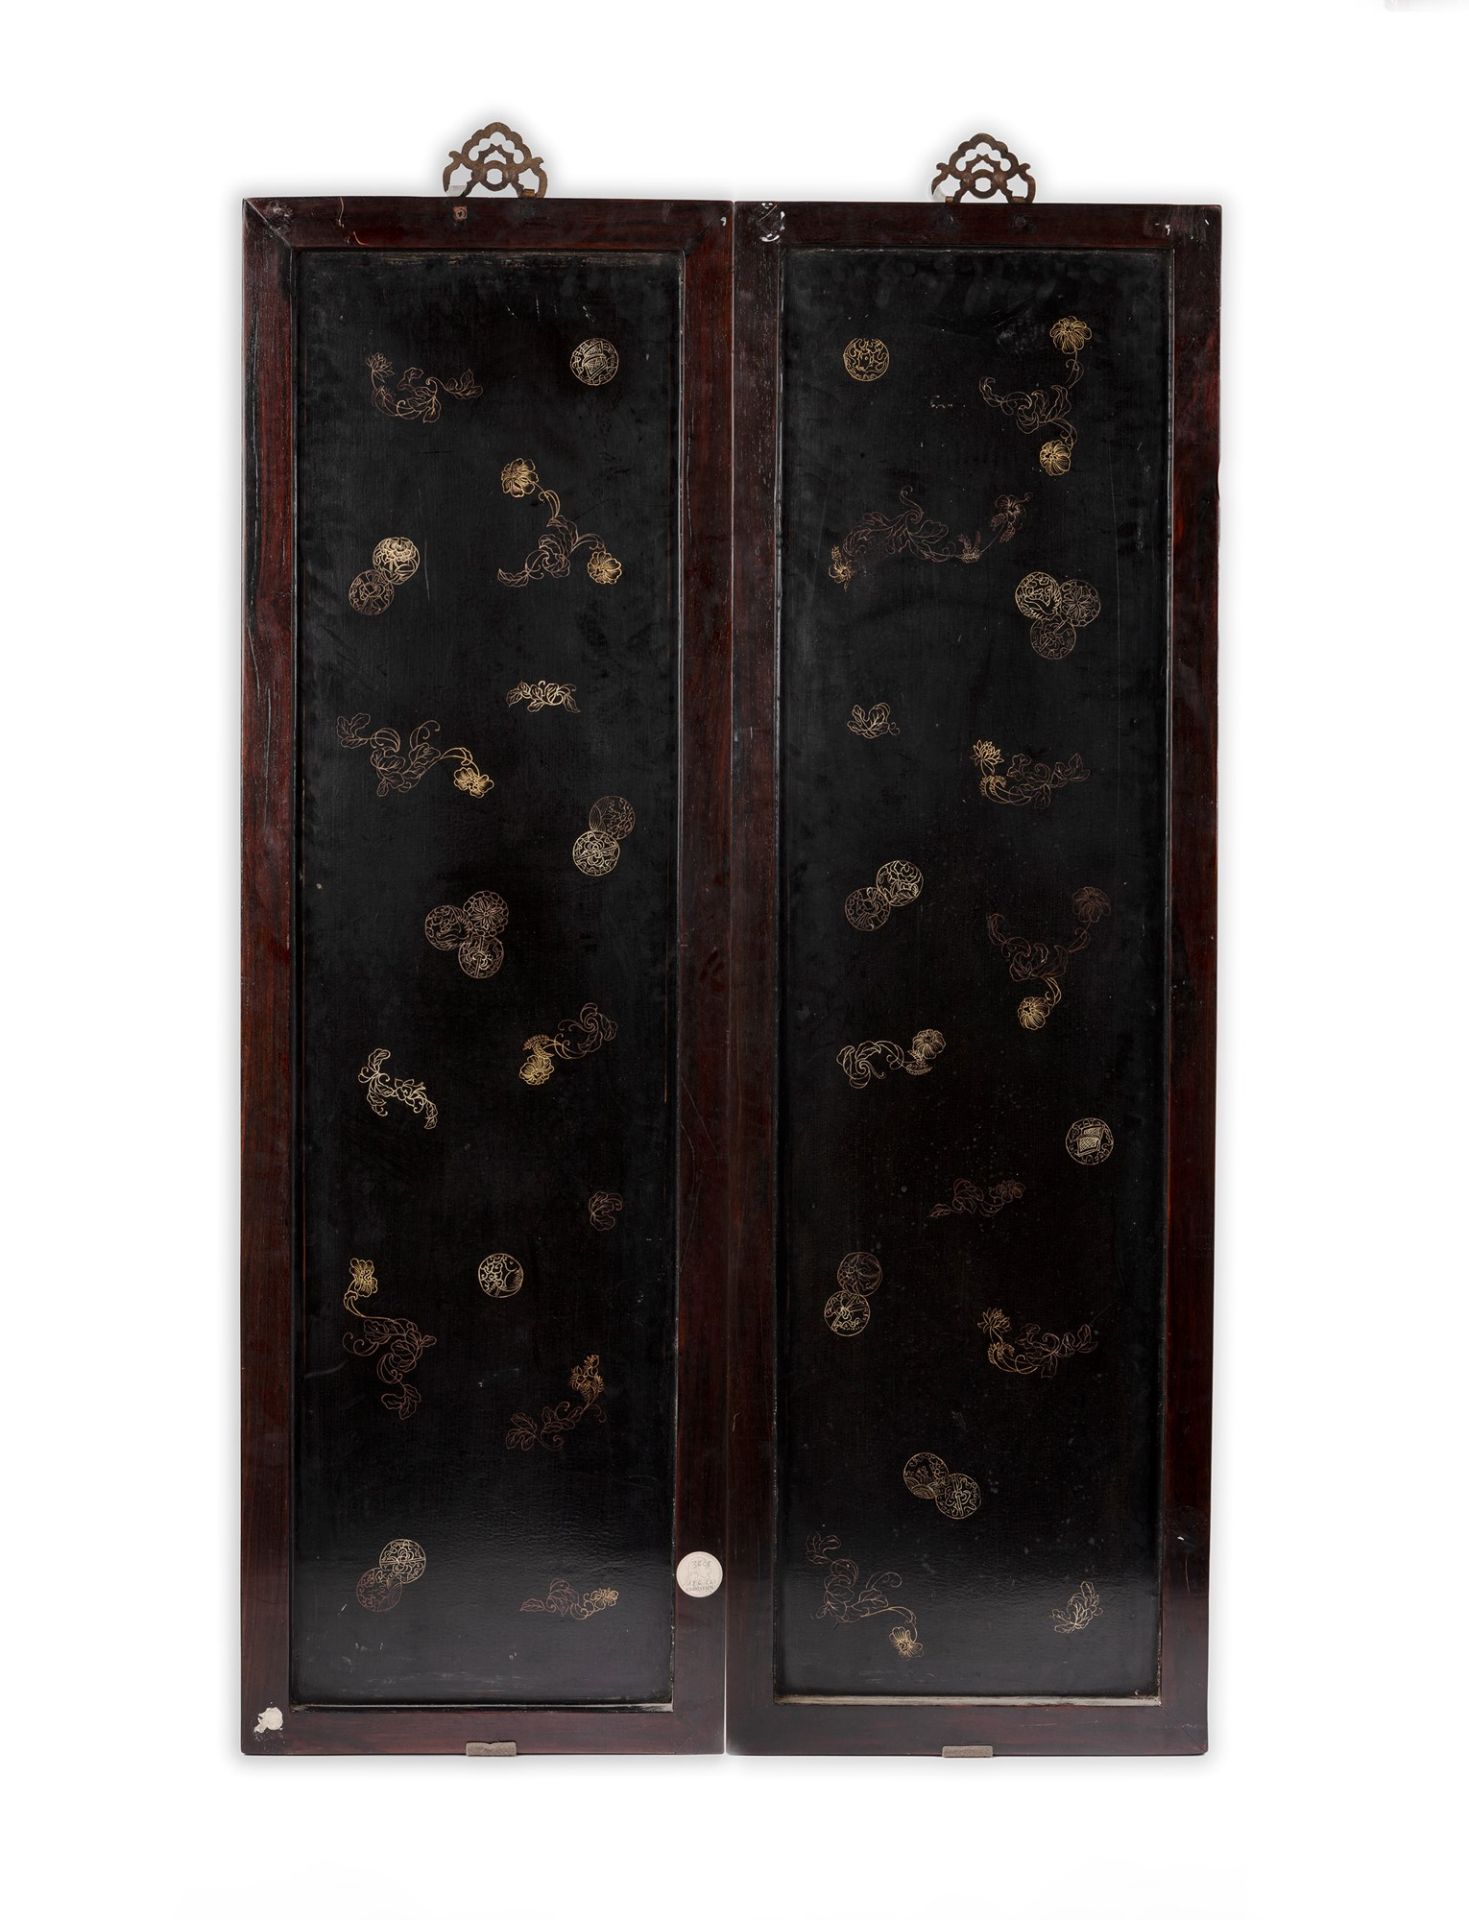 A PAIR OF LACQUERED WOOD PANELS AND JADE CARVINGS, China, early 20th century - Image 2 of 2